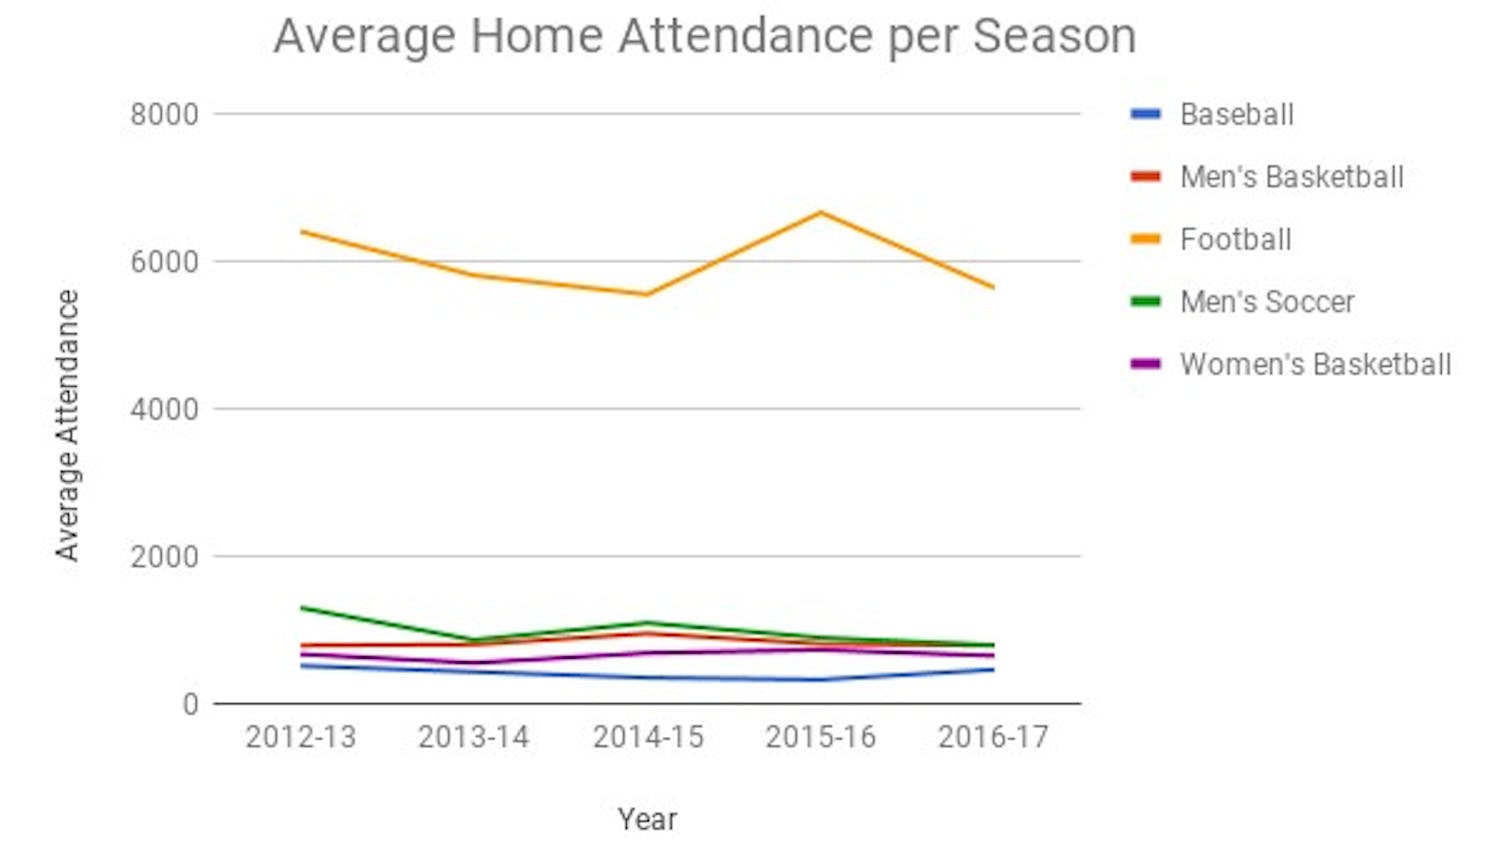 Baseball, men's basketball, football, men's soccer and women's basketball have had relatively constant attendance since 2012.